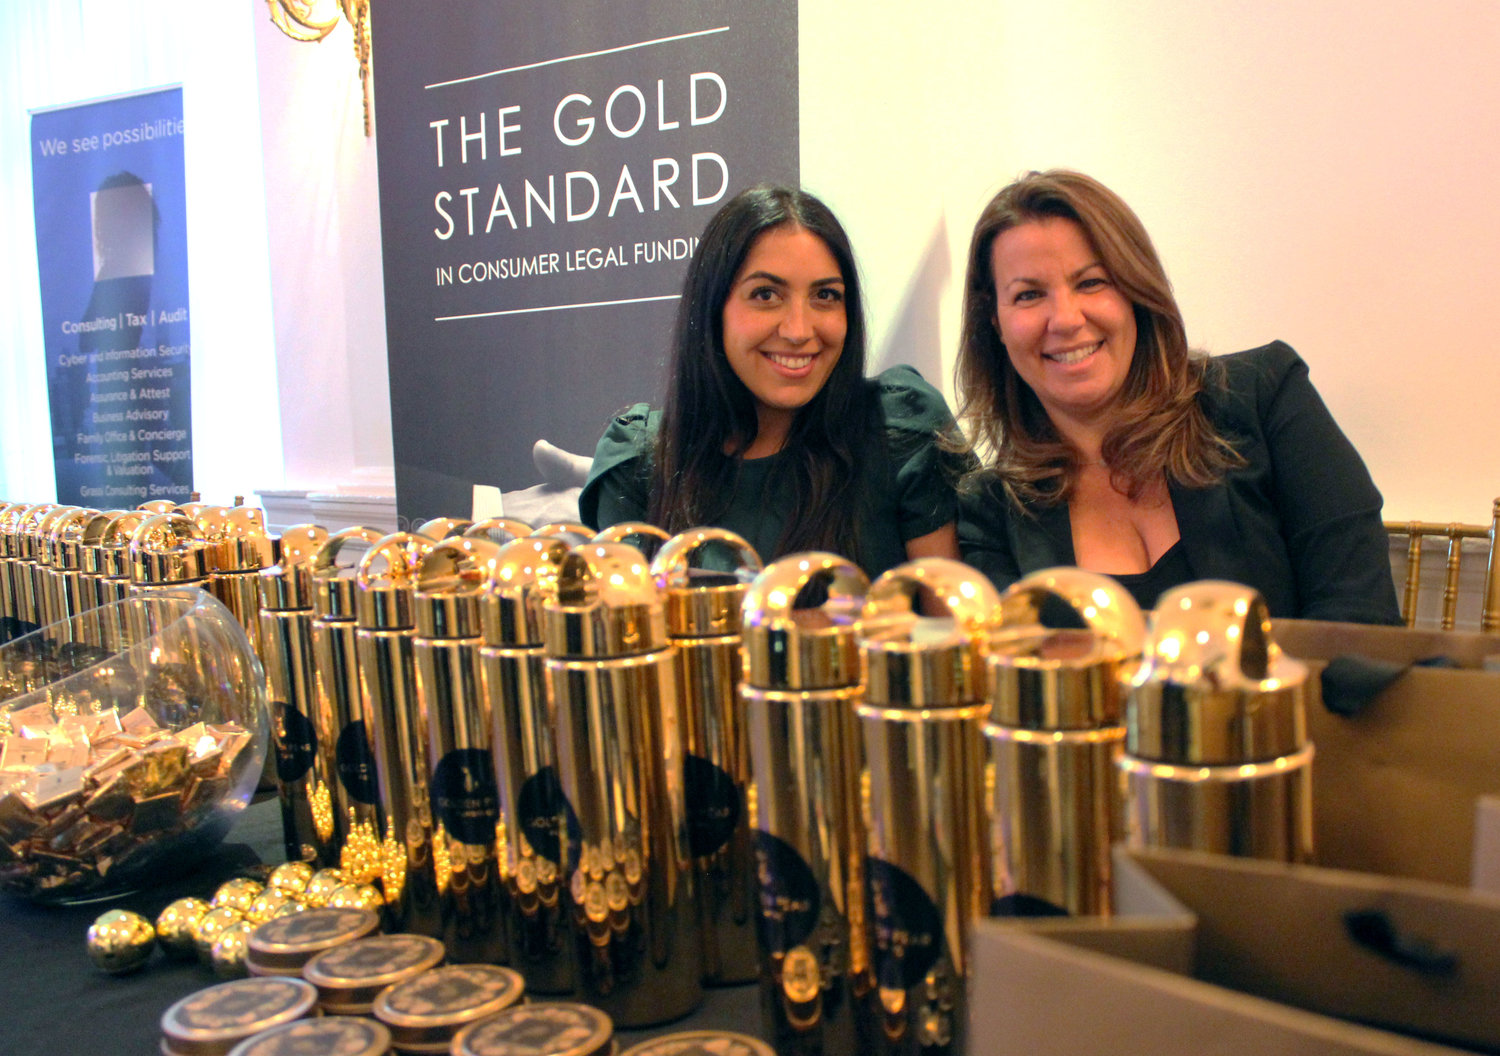 Samantha DeVictoria and Samantha Frankel, sales managers at Golden Pear Funding, greeted honorees and guests at a networking and cocktail party.